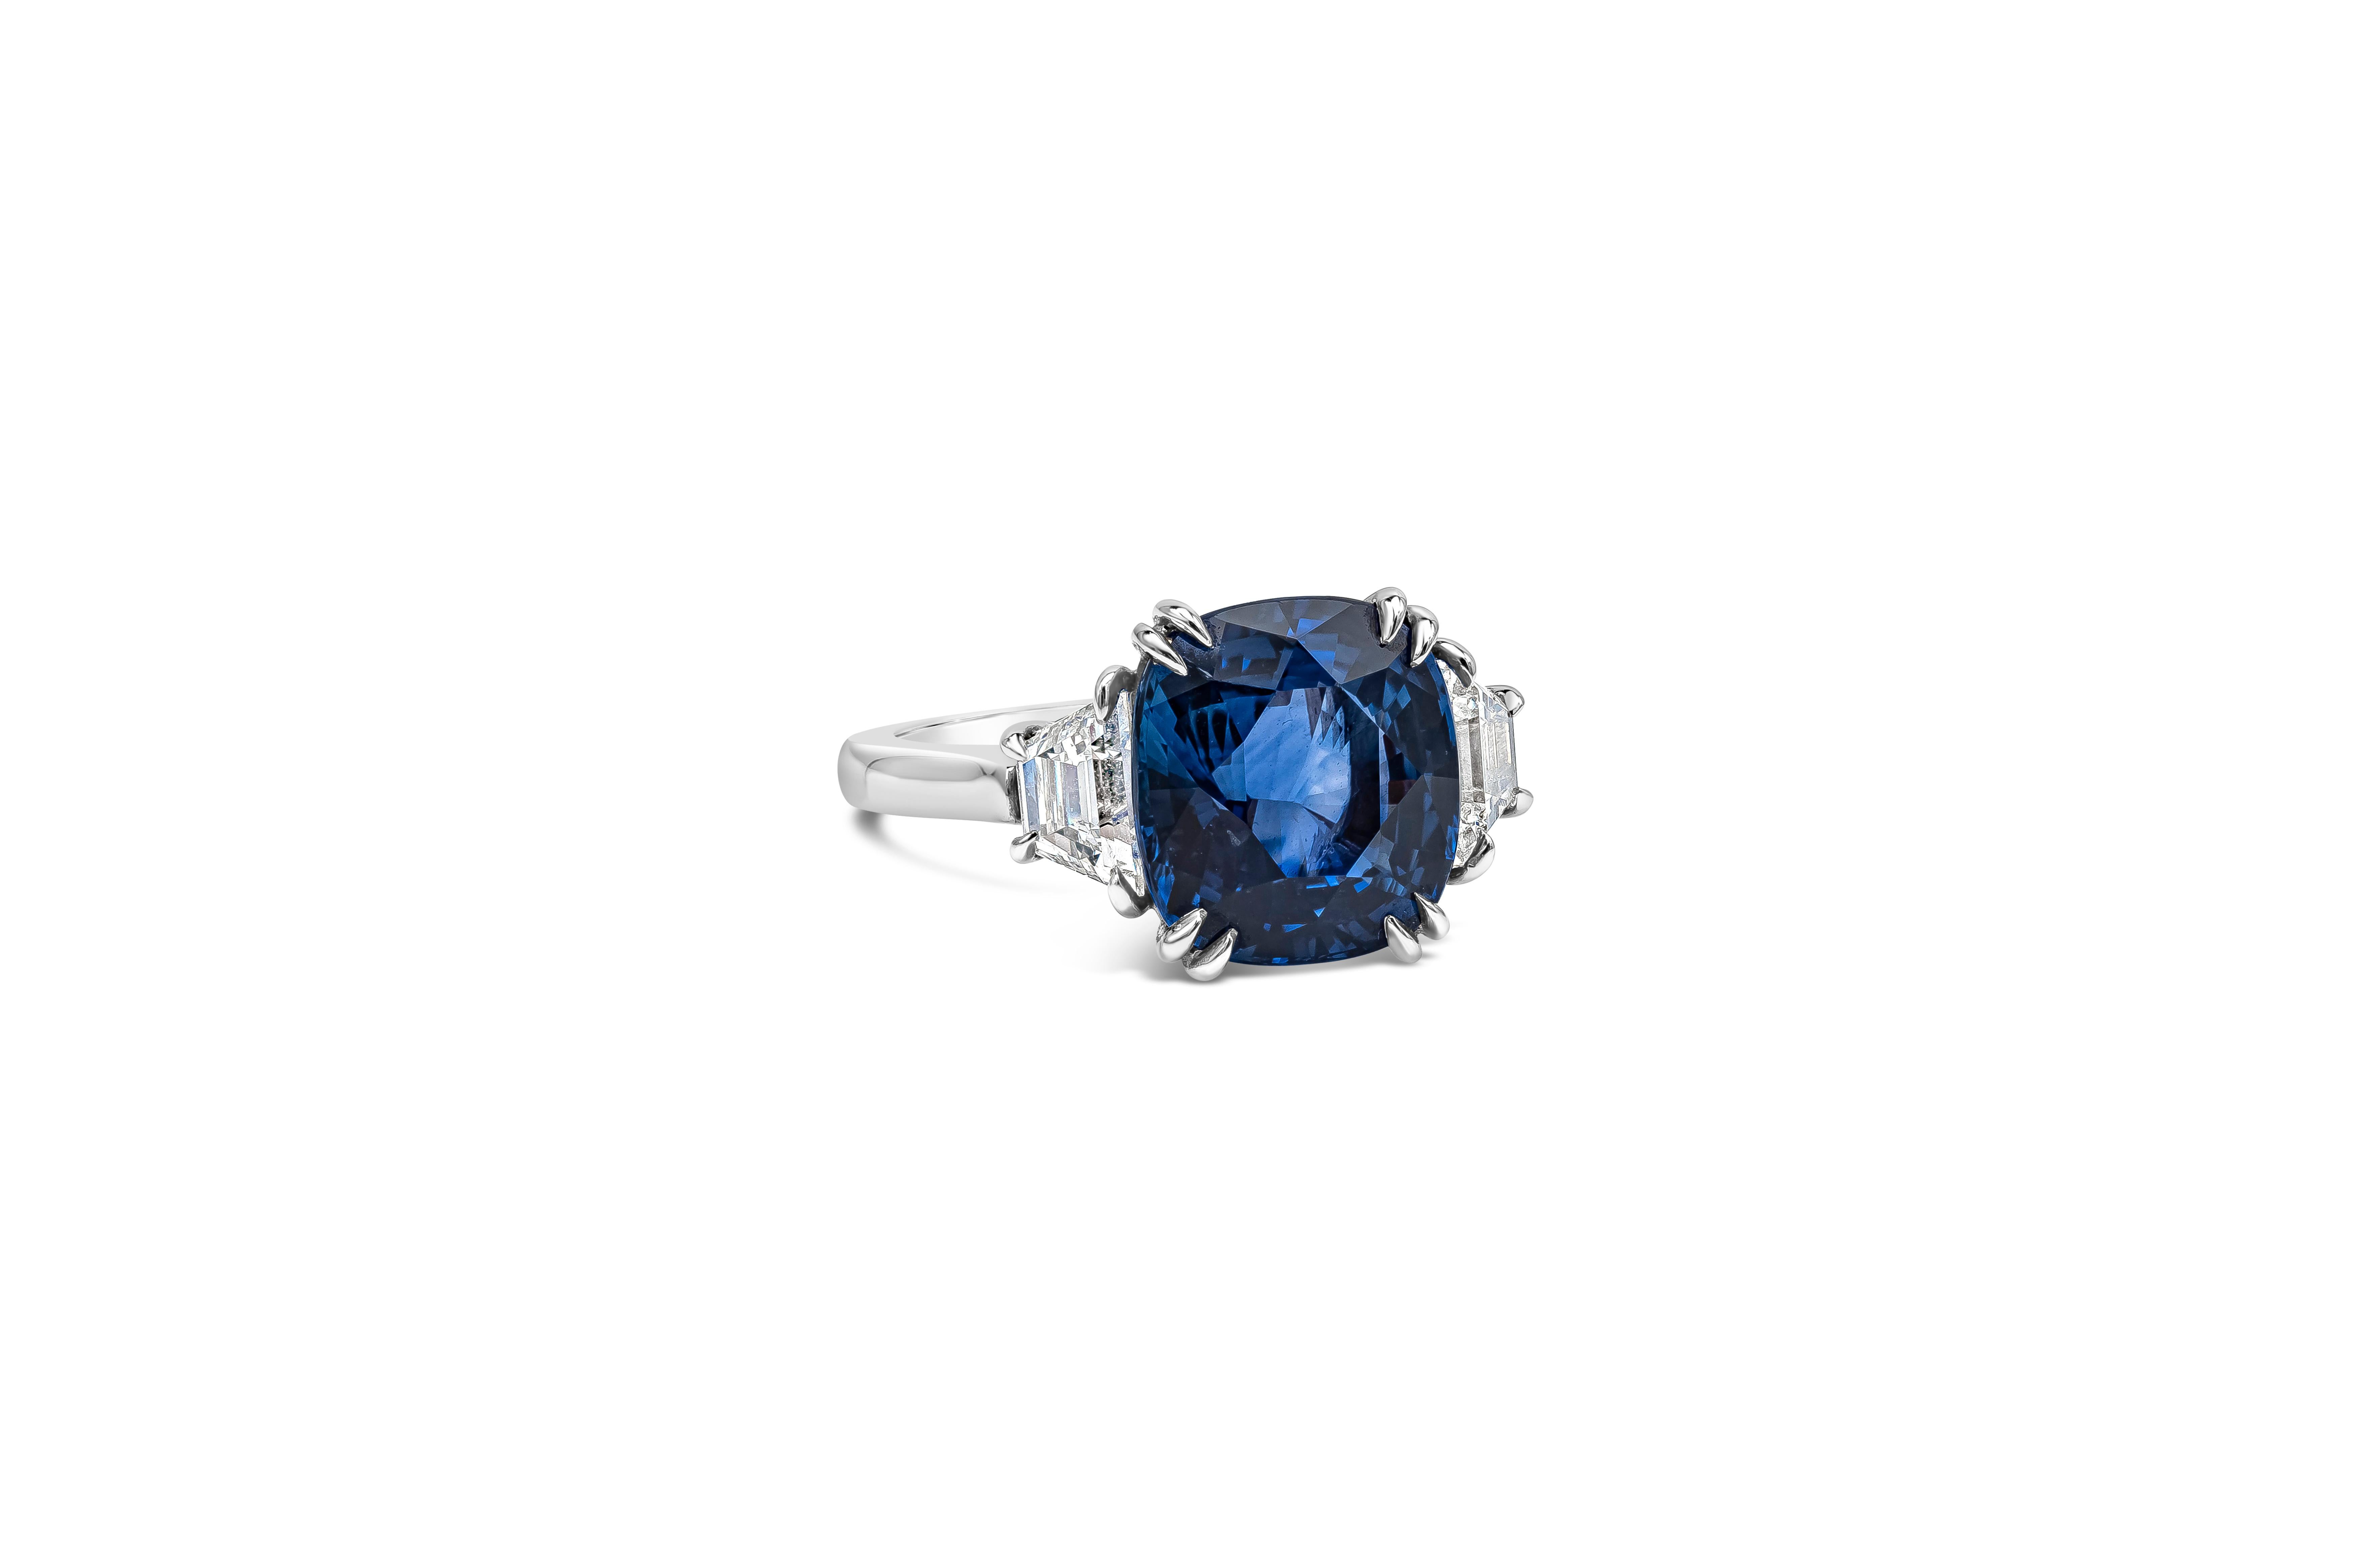 A stunning gemstone three stone engagement ring style showcasing a cushion cut blue sapphire center stone weighing 6.10 carat total, set in a double claw prong setting. Flanked by a step-cut trapezoid diamond on each side weighing 0.96 carats total,